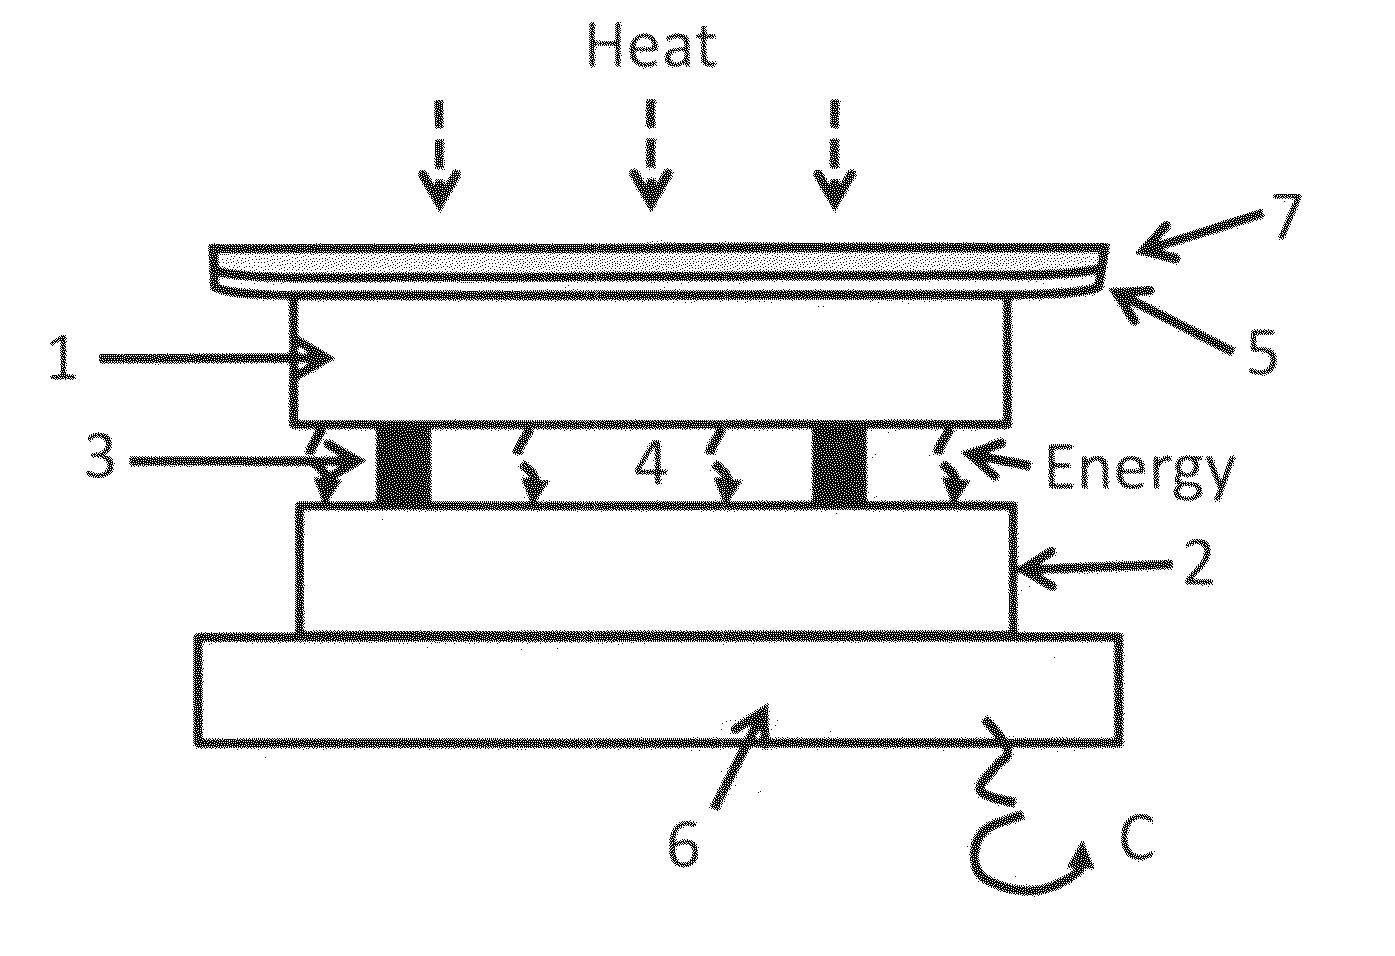 Method and structure, using flexible membrane surfaces, for setting and/or maintaining a uniform micron/sub-micron gap separation between juxtaposed photosensitive and heat-supplying surfaces of photovoltaic chips and the like for the generation of electrical power